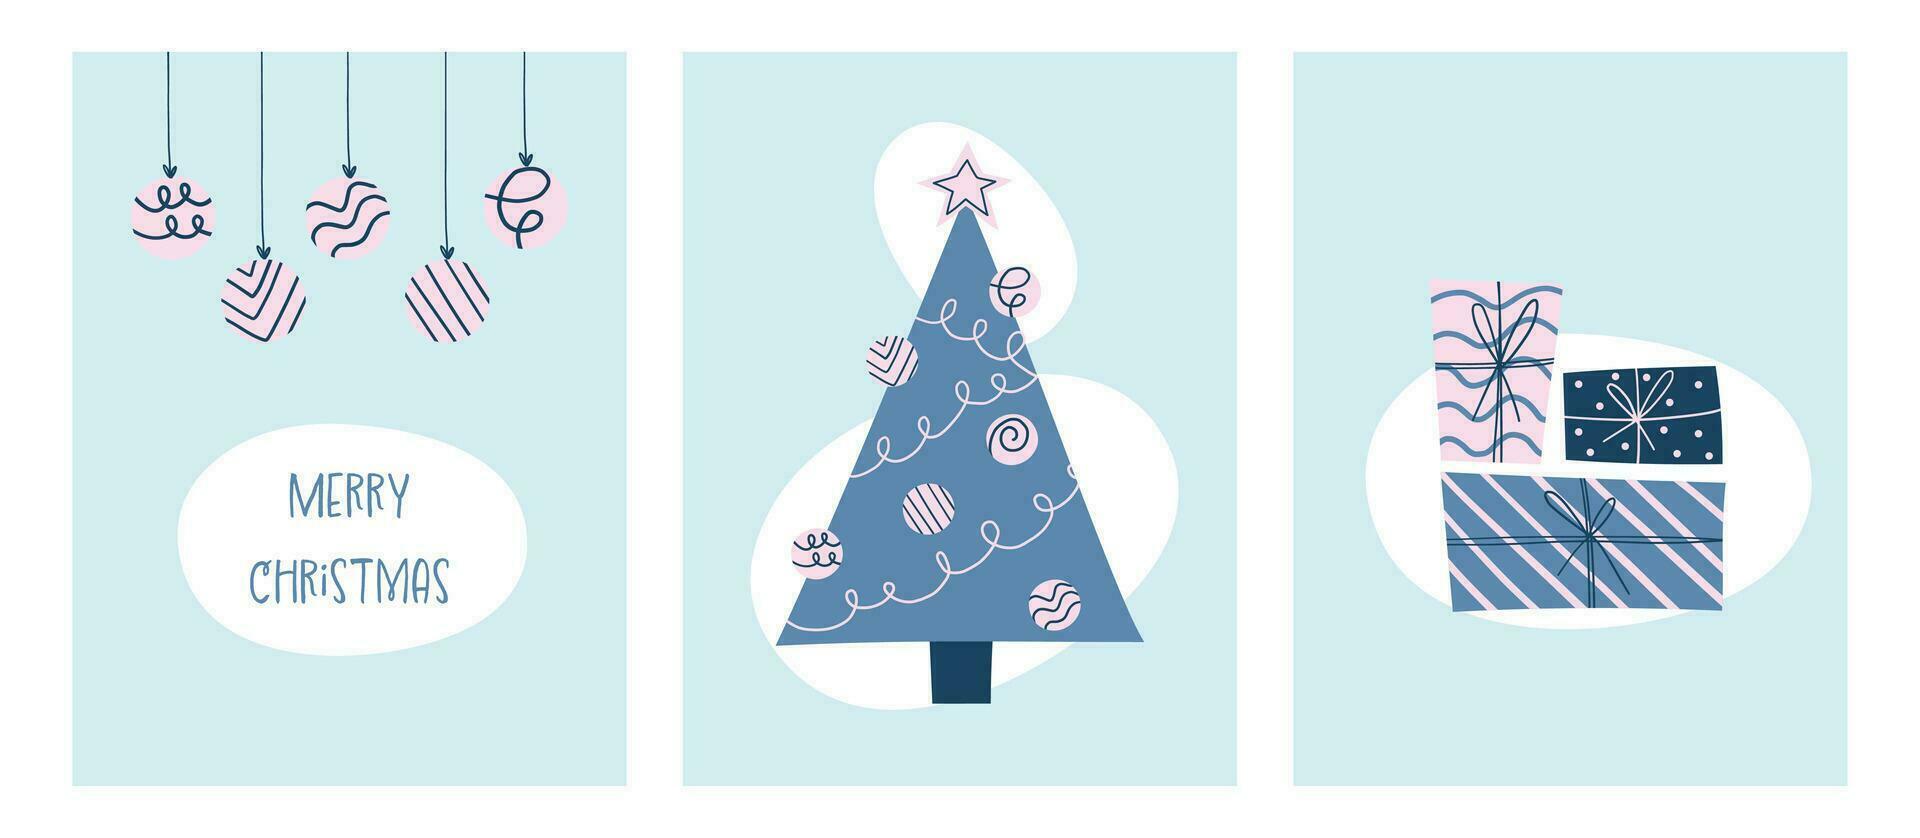 Merry Christmas set greeting cards, holiday covers. Modern Xmas design with triangle fir, balls and gifts in blue and pink colors in naive style. Christmas tree, ball, gifts vector